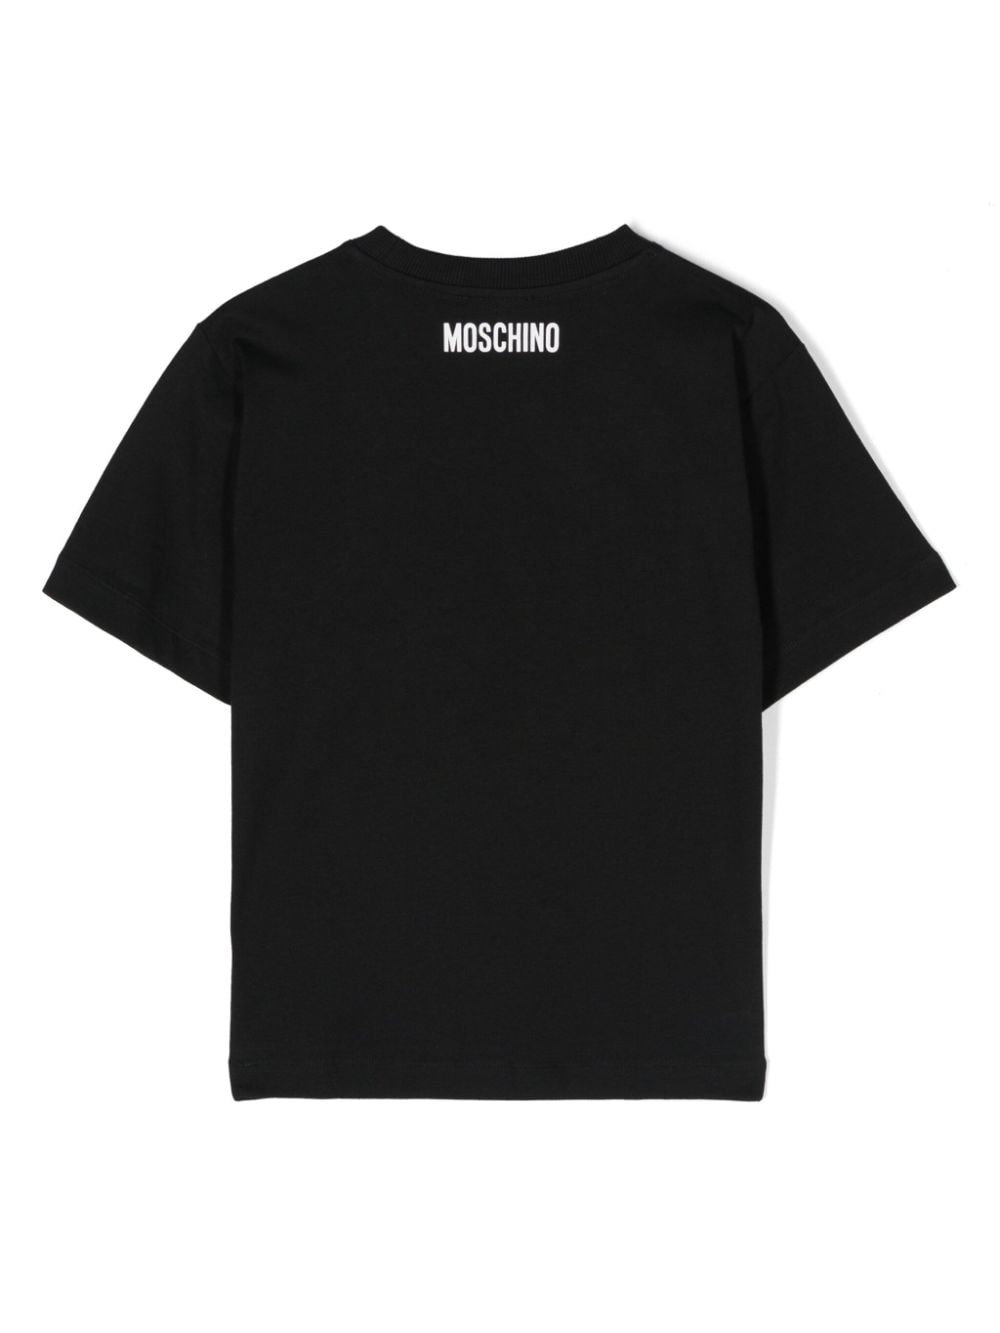 Image 2 of Moschino Kids question mark-print T-shirt